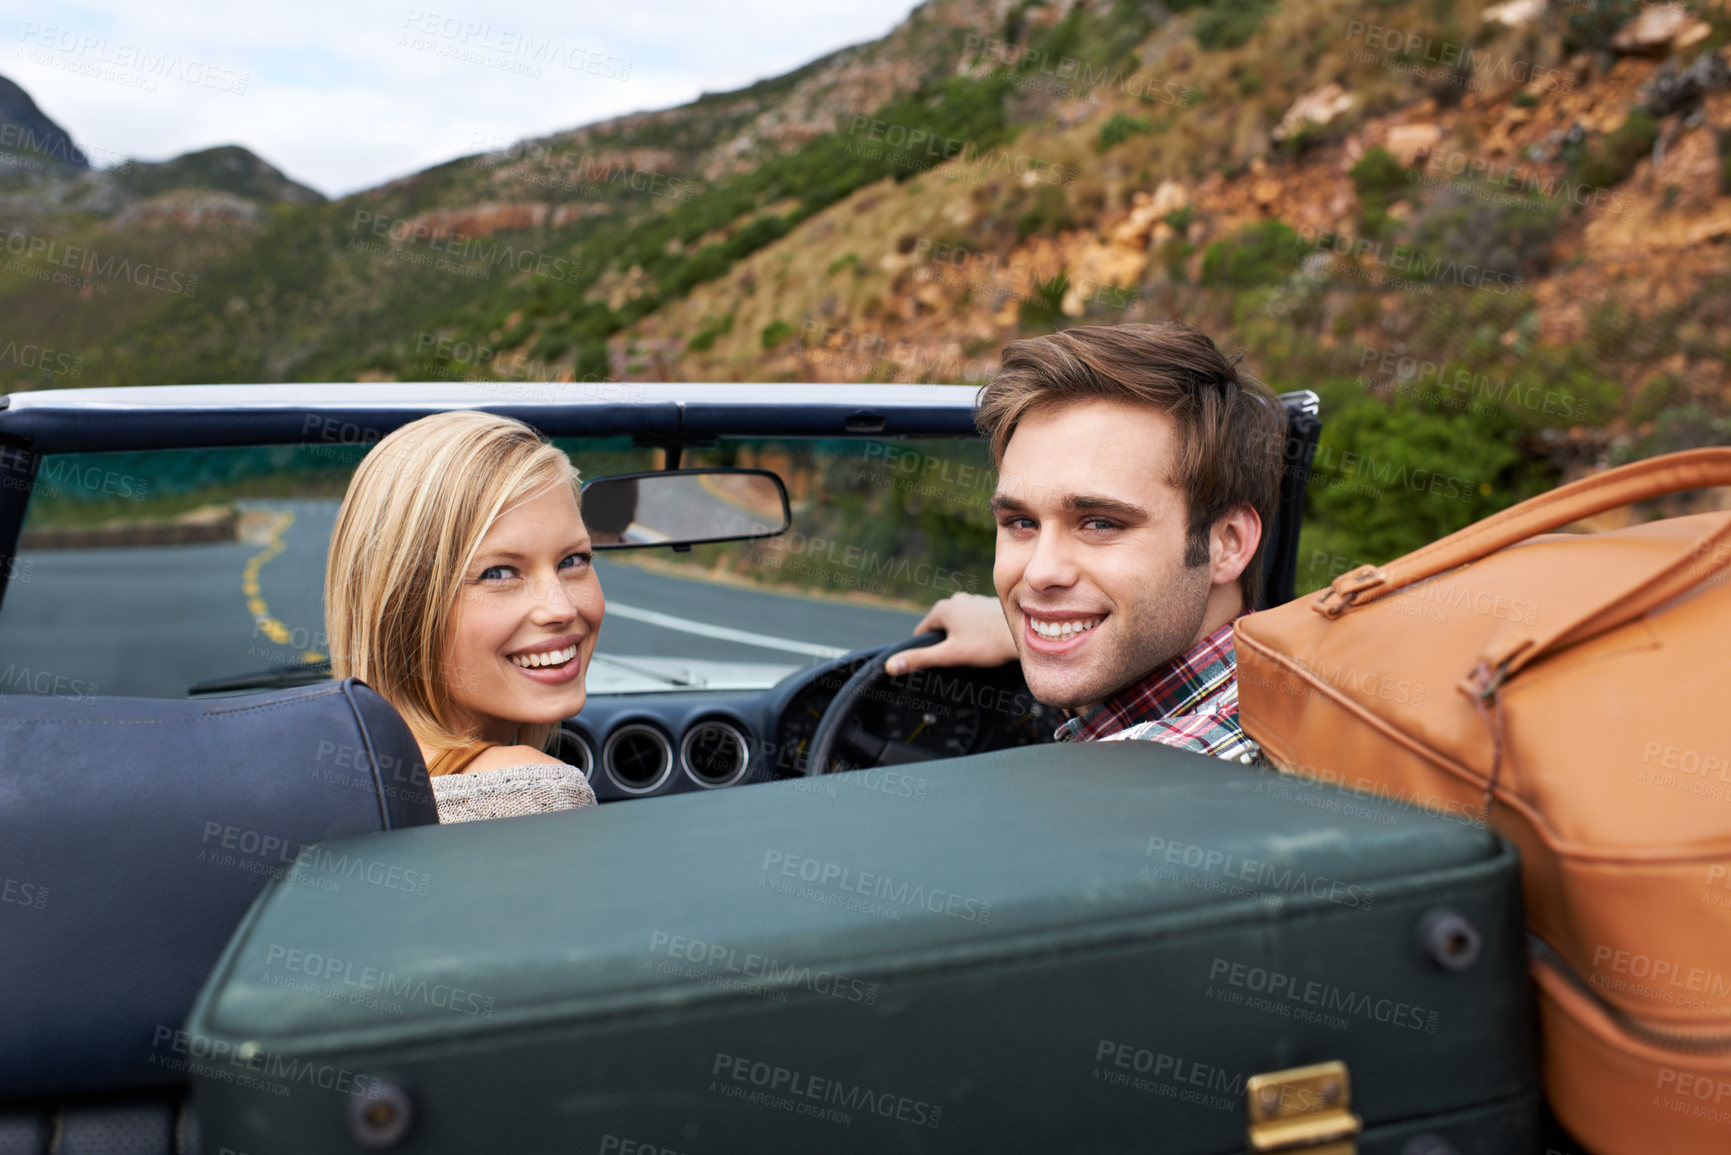 Buy stock photo Suitcases, driving and portrait of couple in a car for travel to vacation, adventure or holiday destination. Happy, love and young man and woman on journey in vehicle for weekend road trip together.